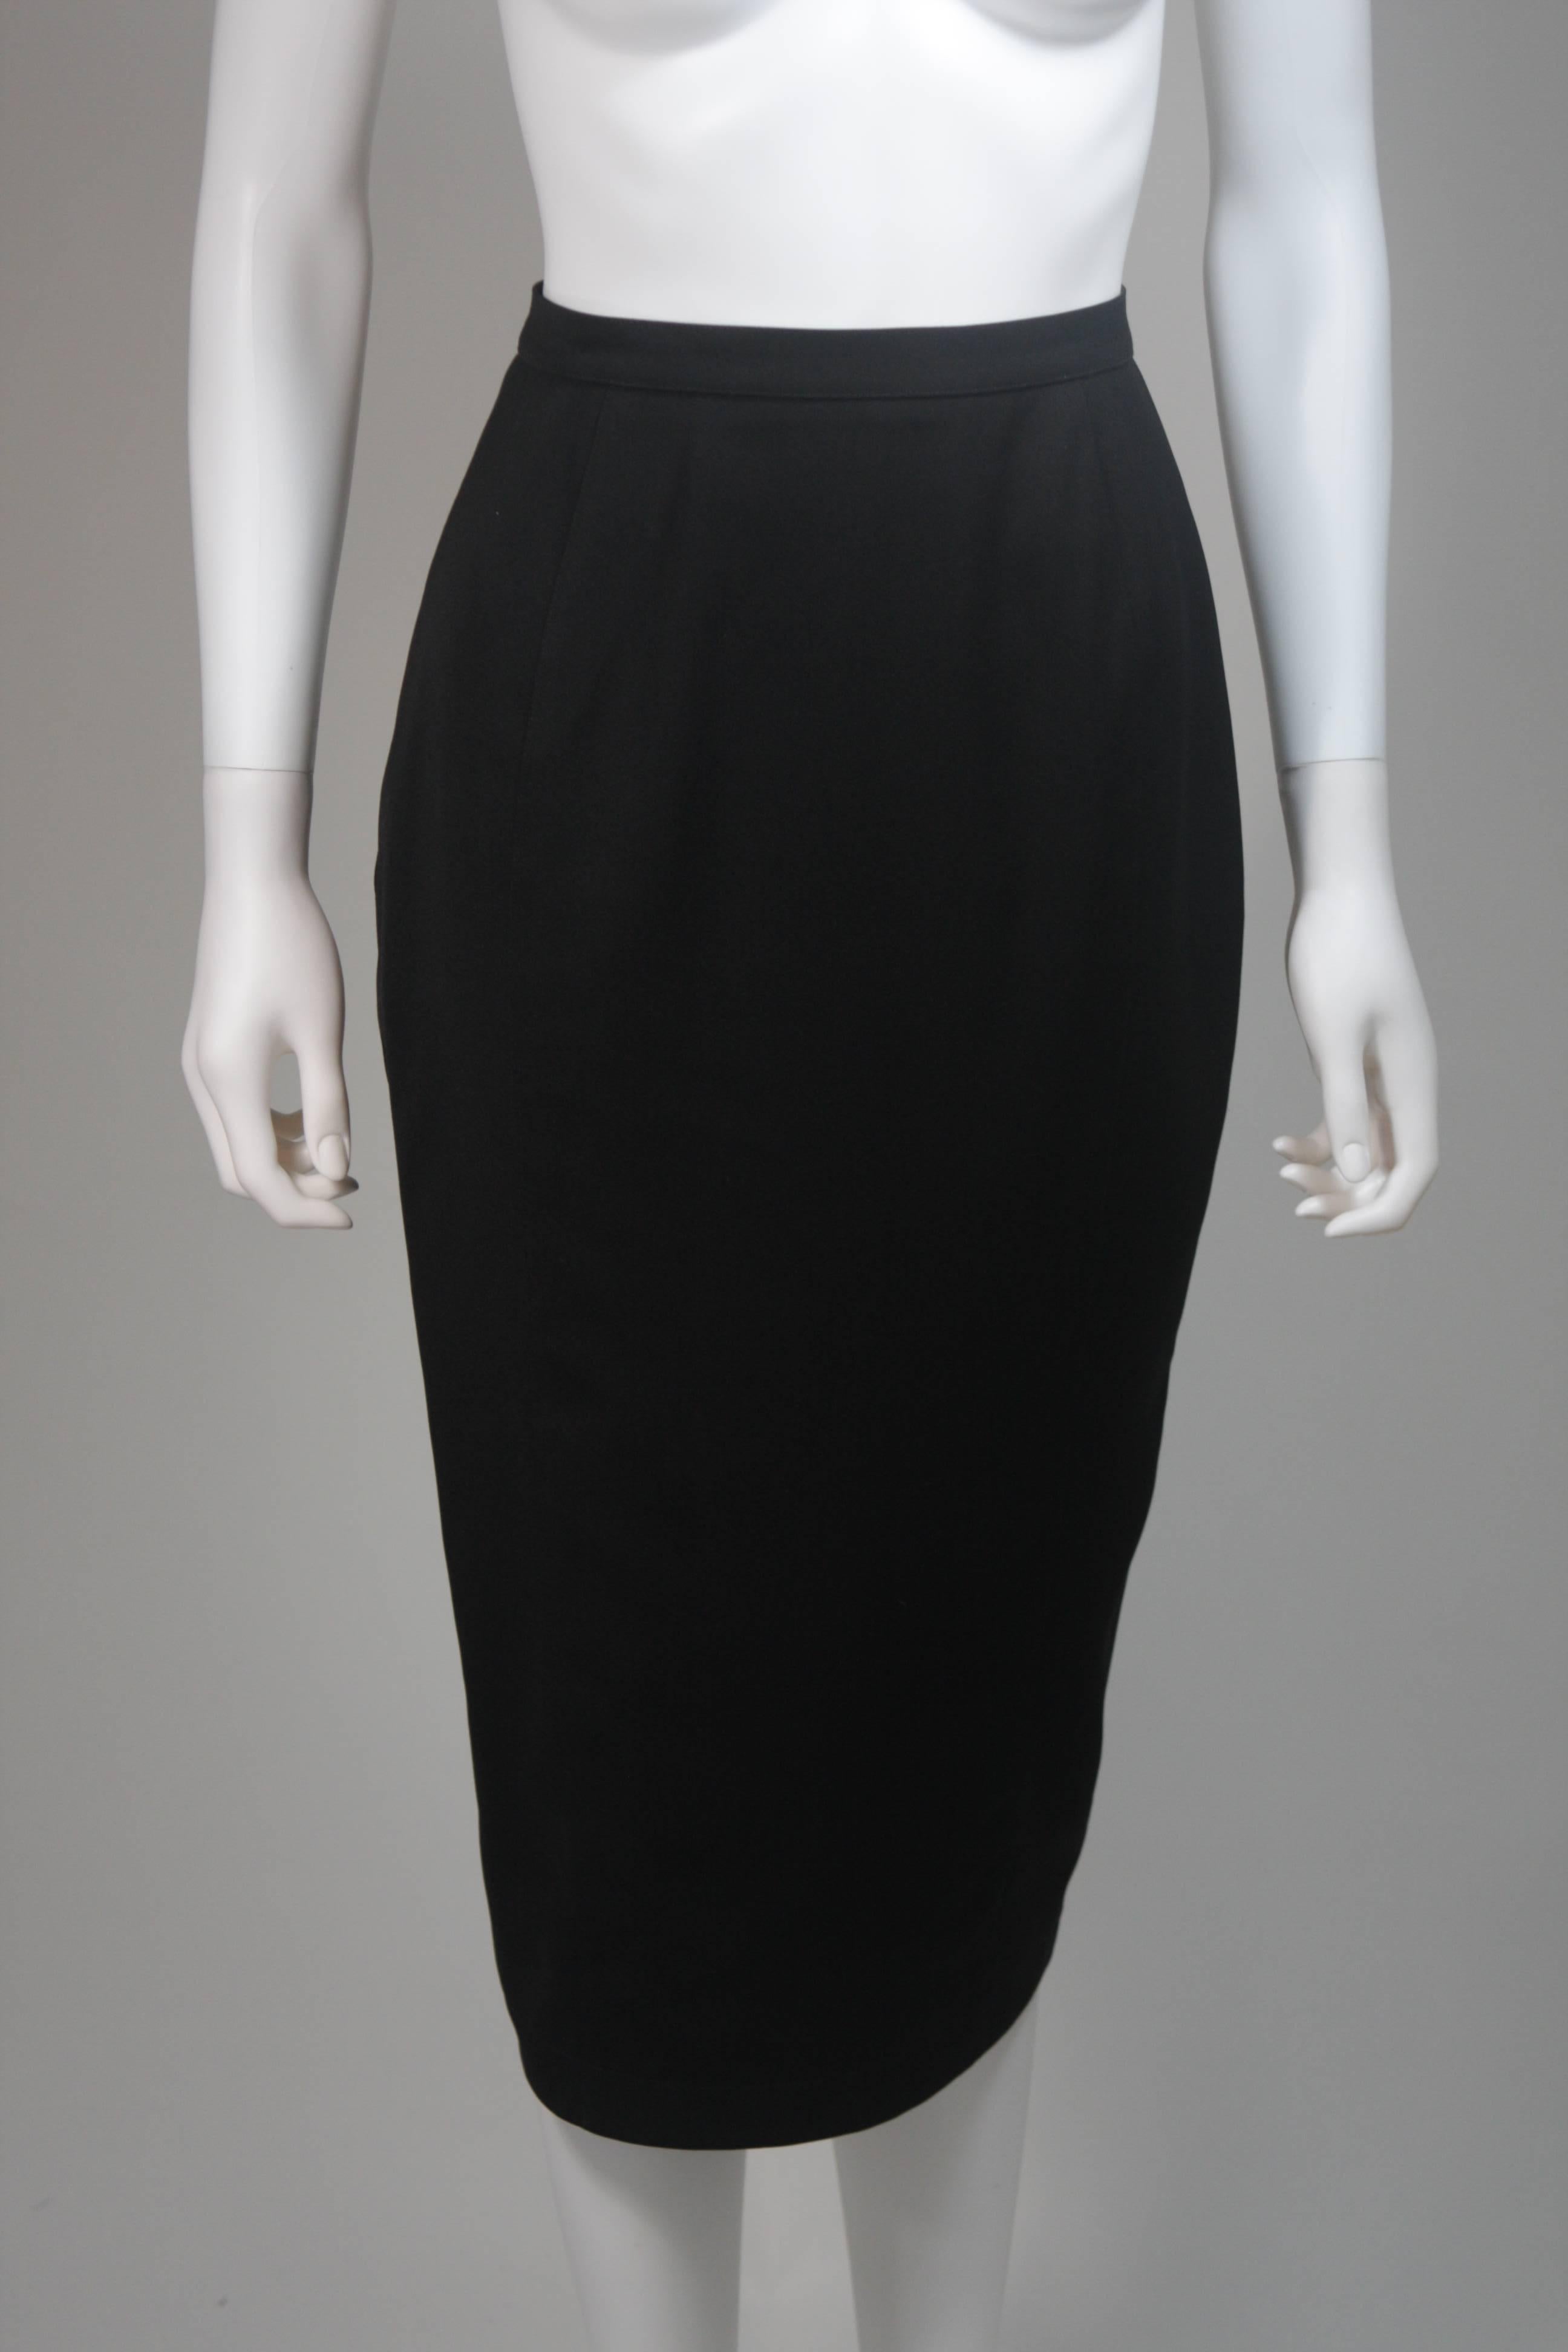 Thierry Mugler 1950's Style Black Ruched Skirt Suit Size 36 2